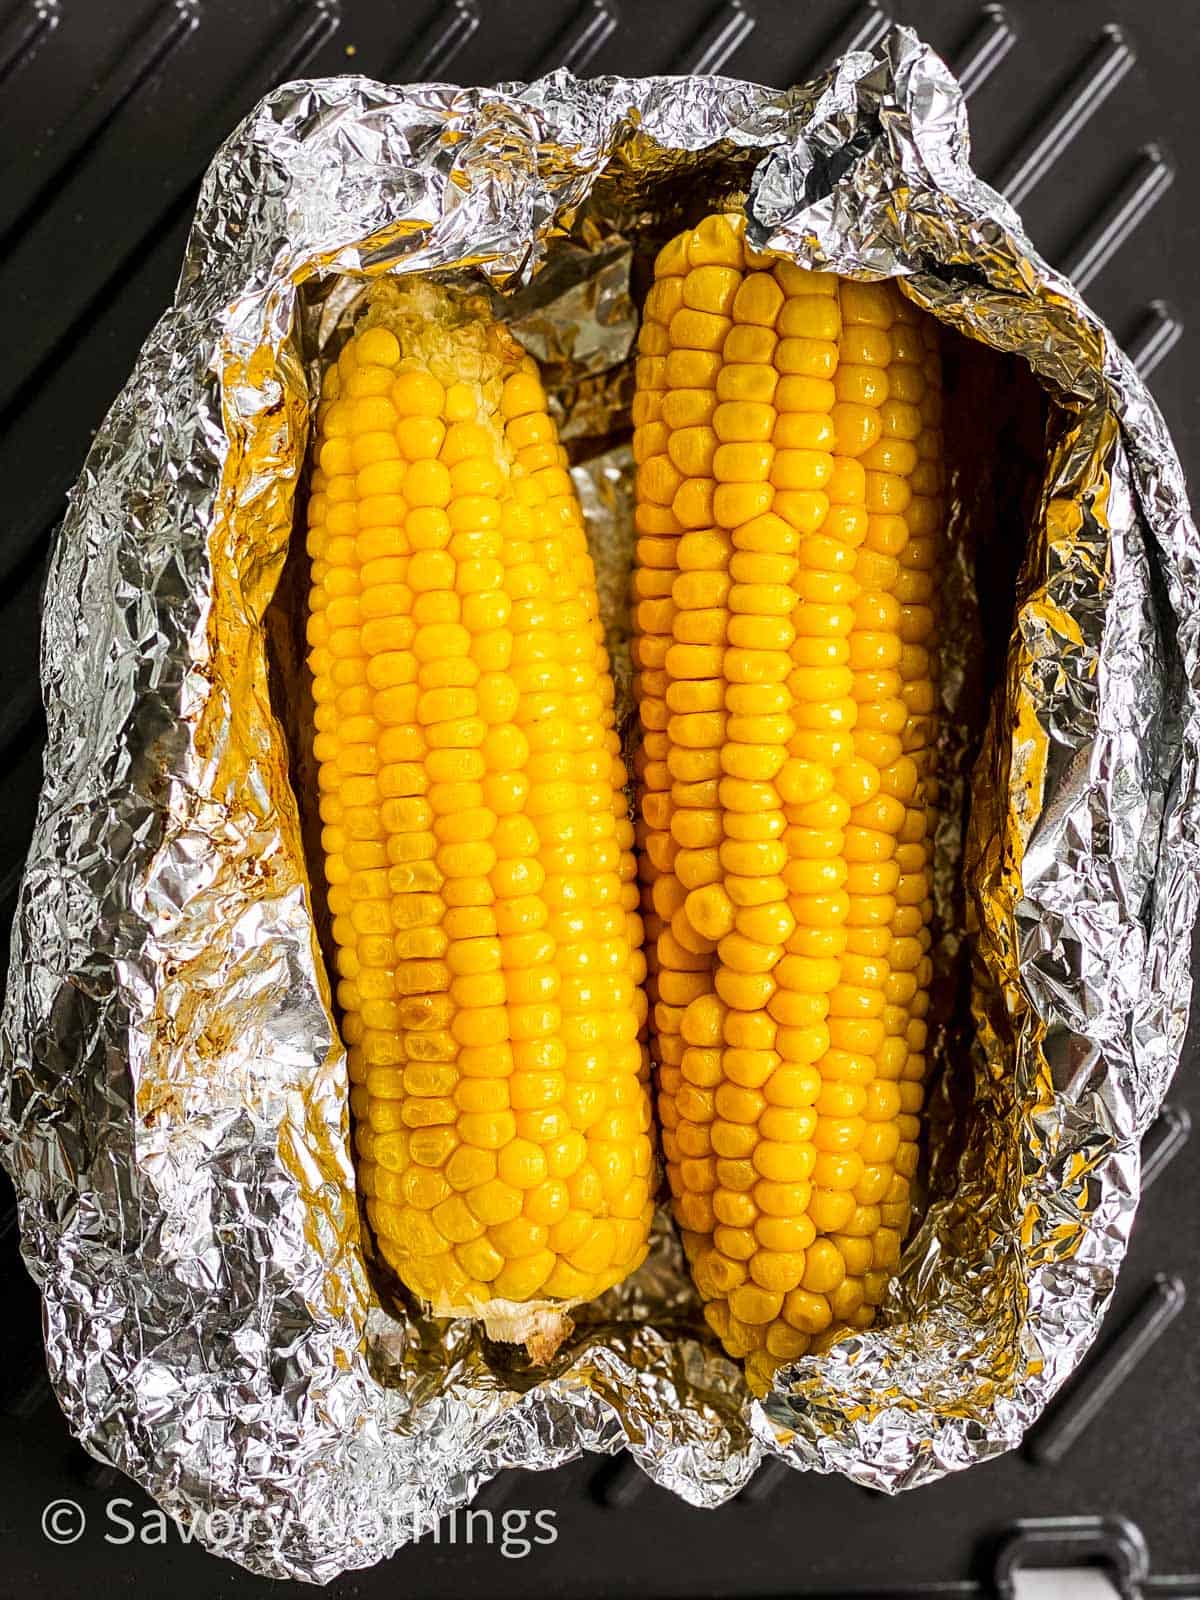 grilled corn on the cob in opened foil packet on grill